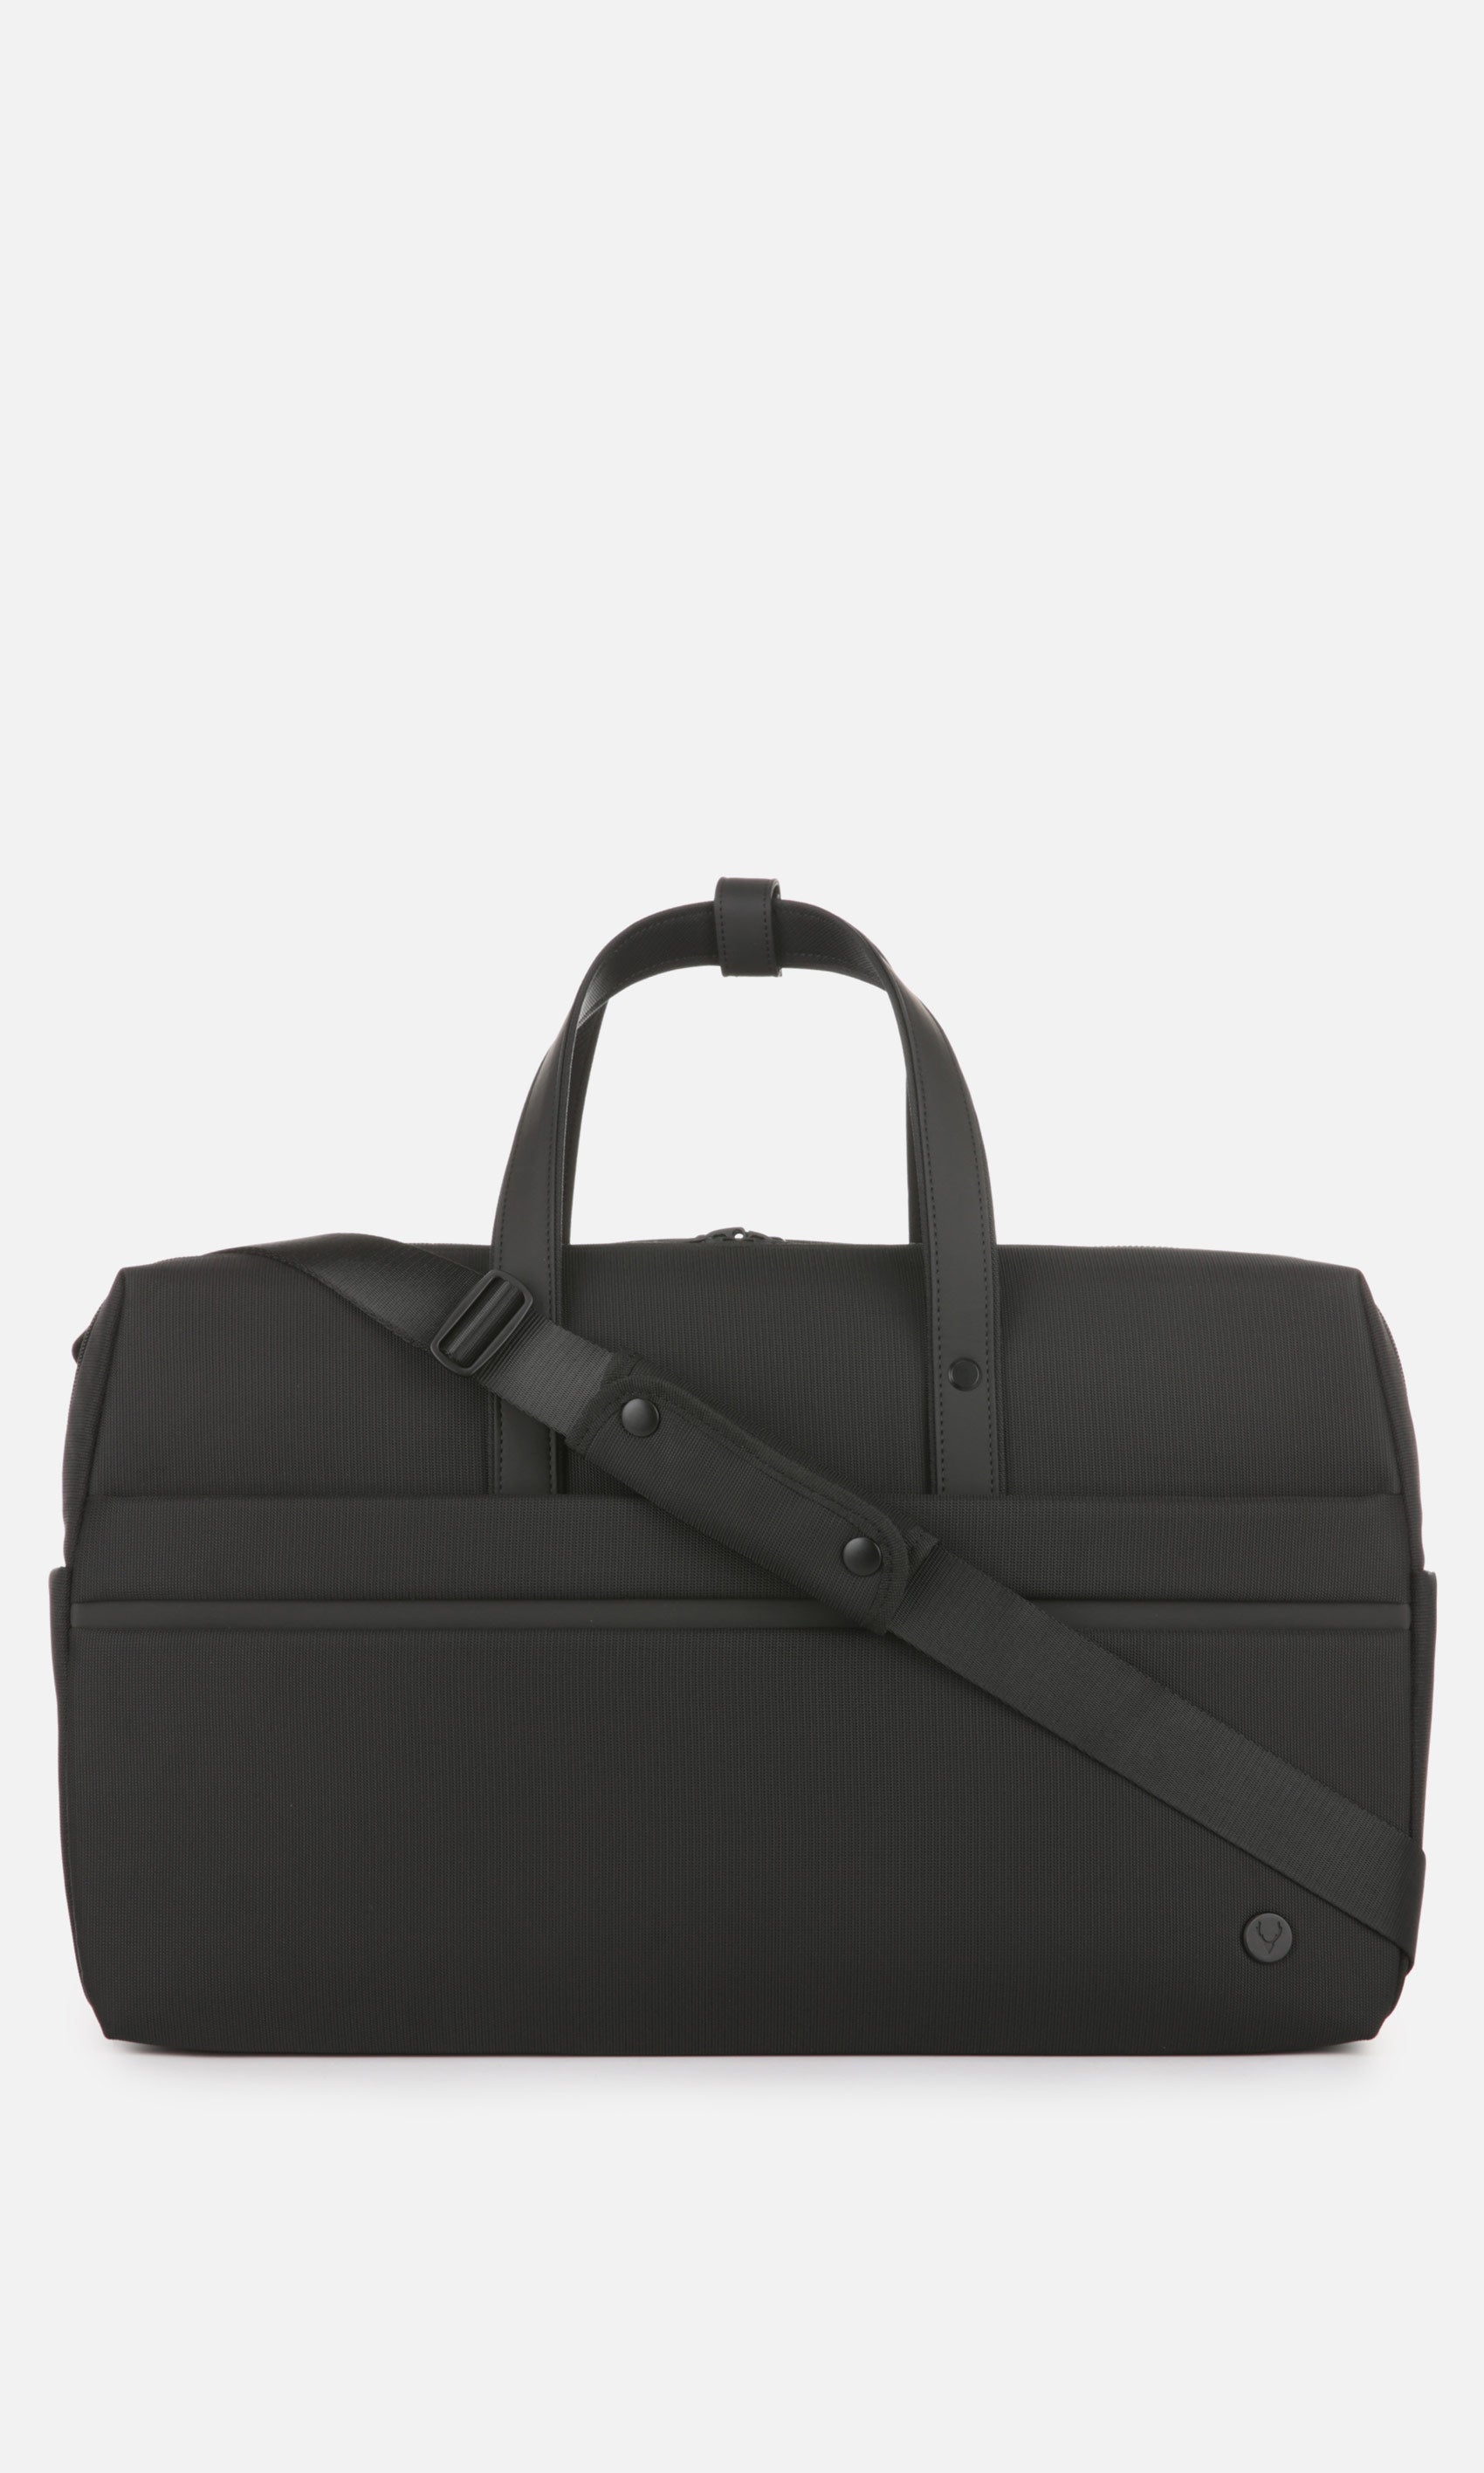 View Antler Stirling Lieflat Holdall In Black Size 52 x 30 x 26 cm information